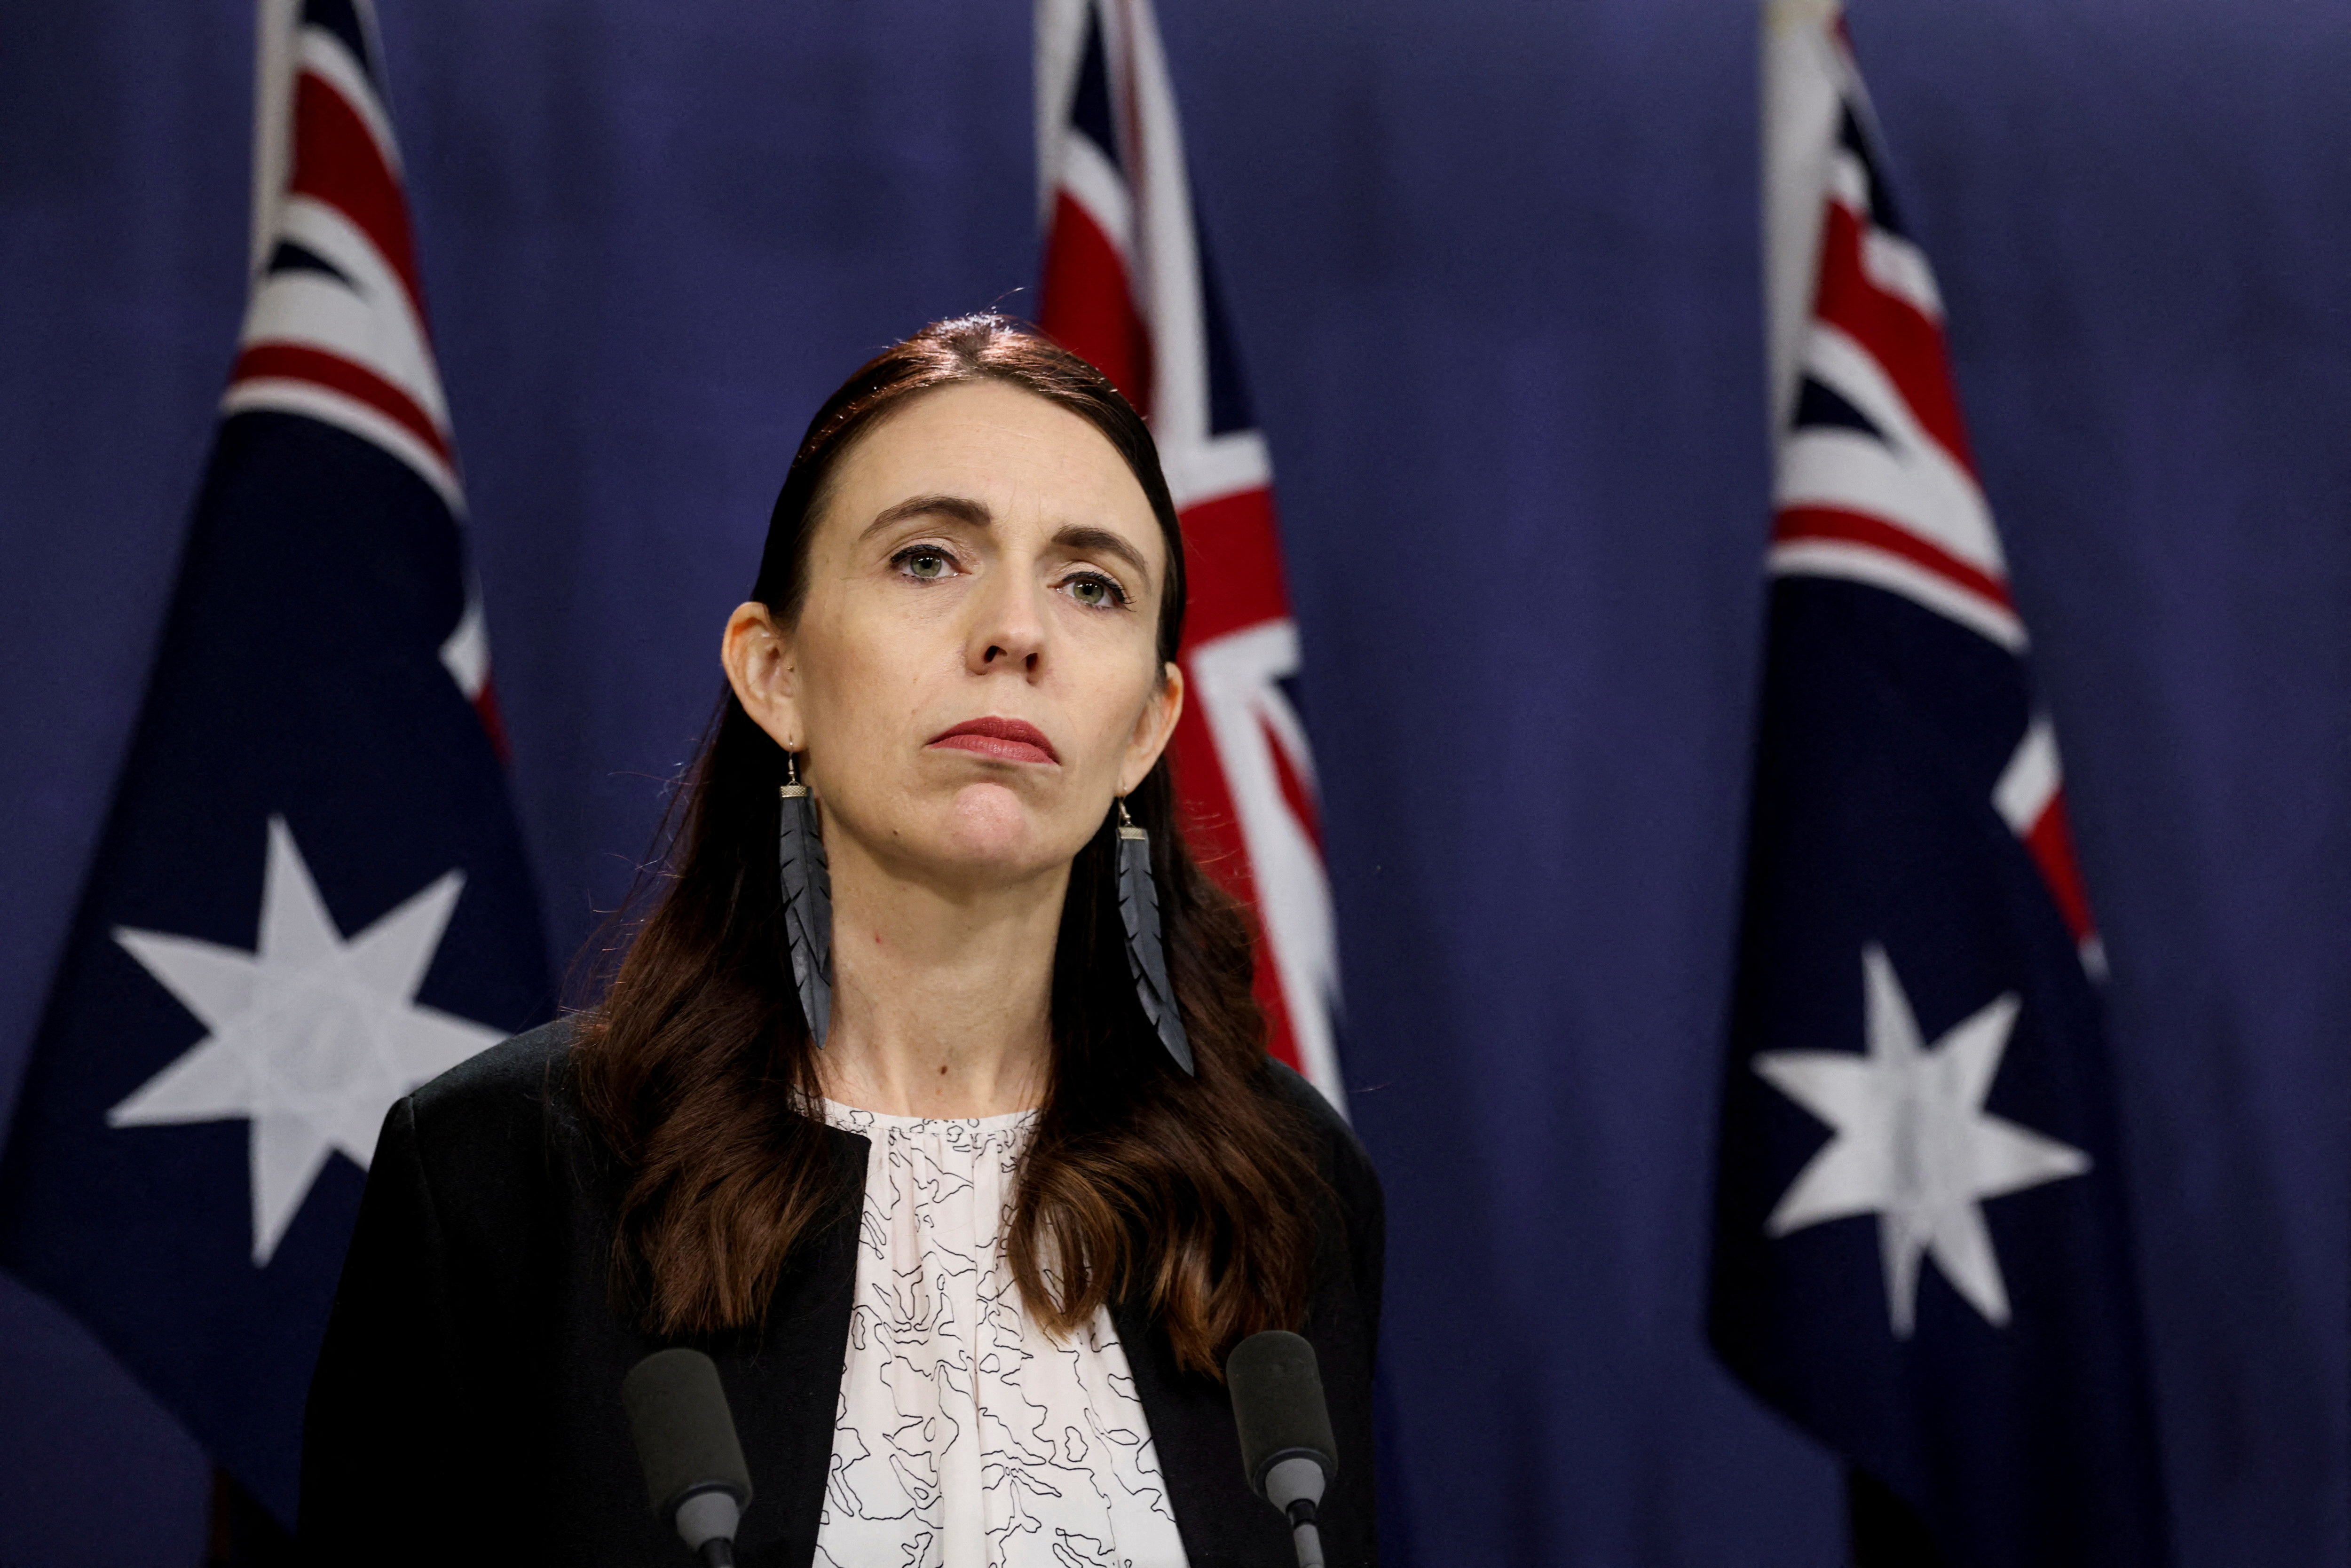 Prime Minister of New Zealand Ardern and Prime Minister of Australia Albanese held a press conference in Sydney